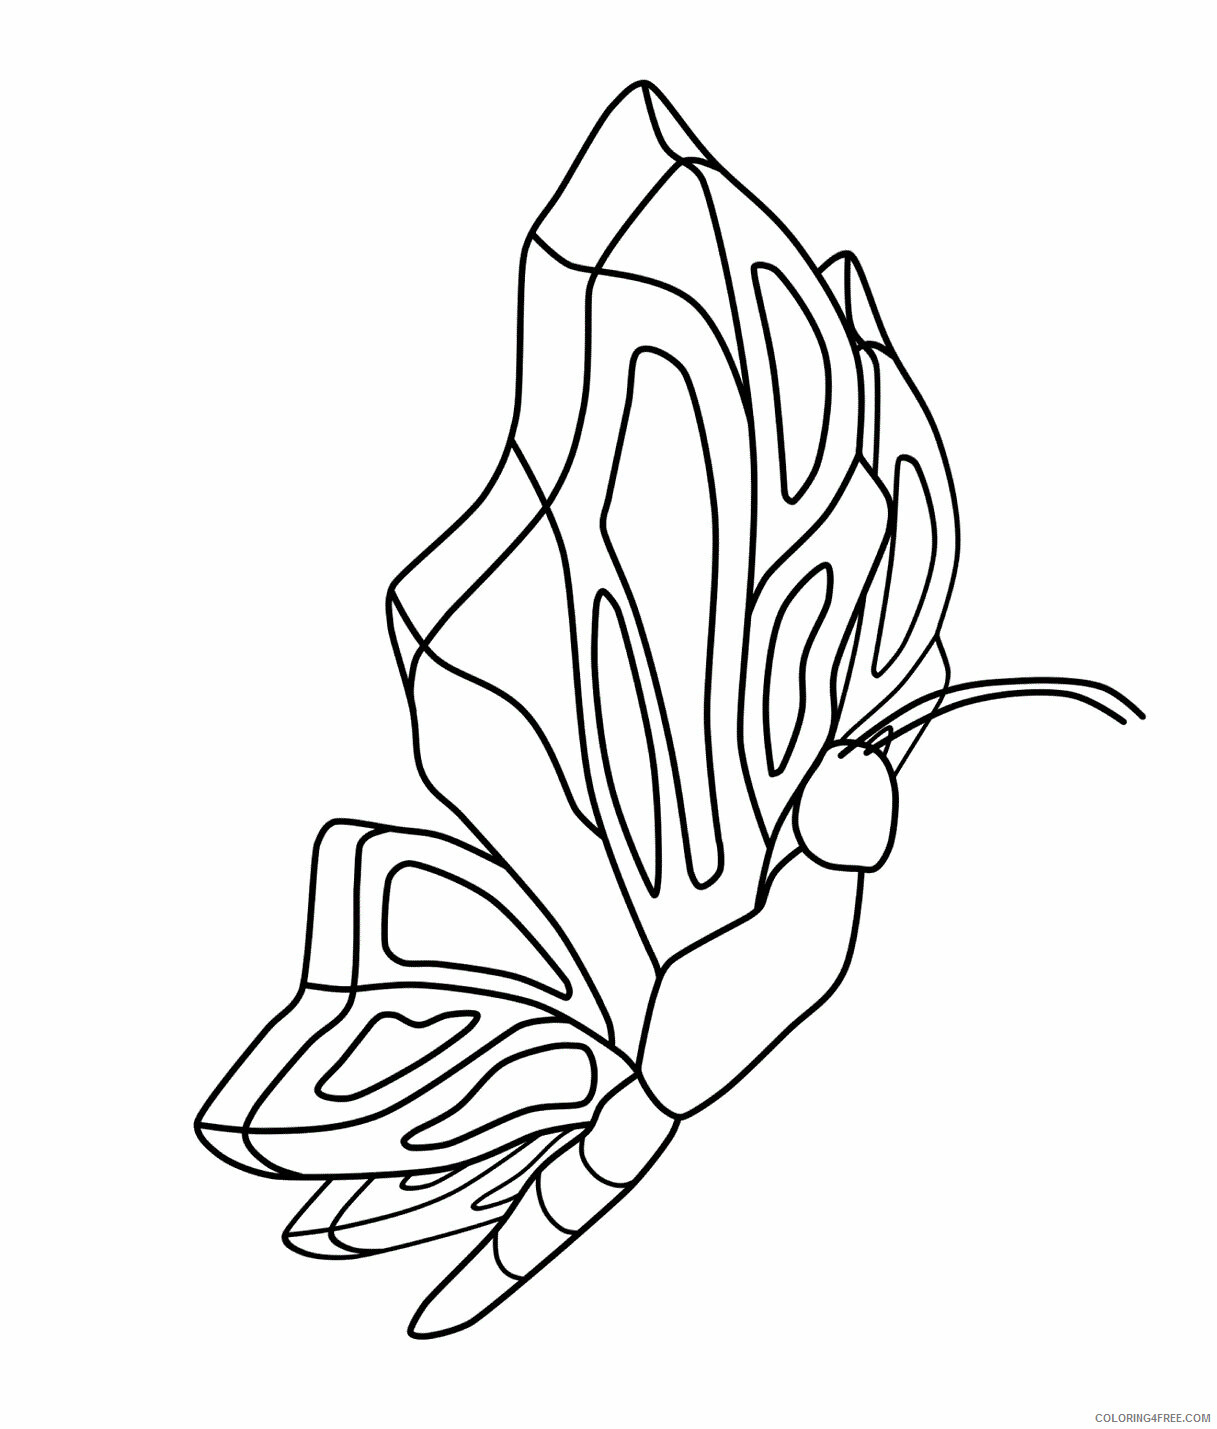 Butterfly Coloring Pages Animal Printable Sheets of Butterfly 2021 0700 Coloring4free